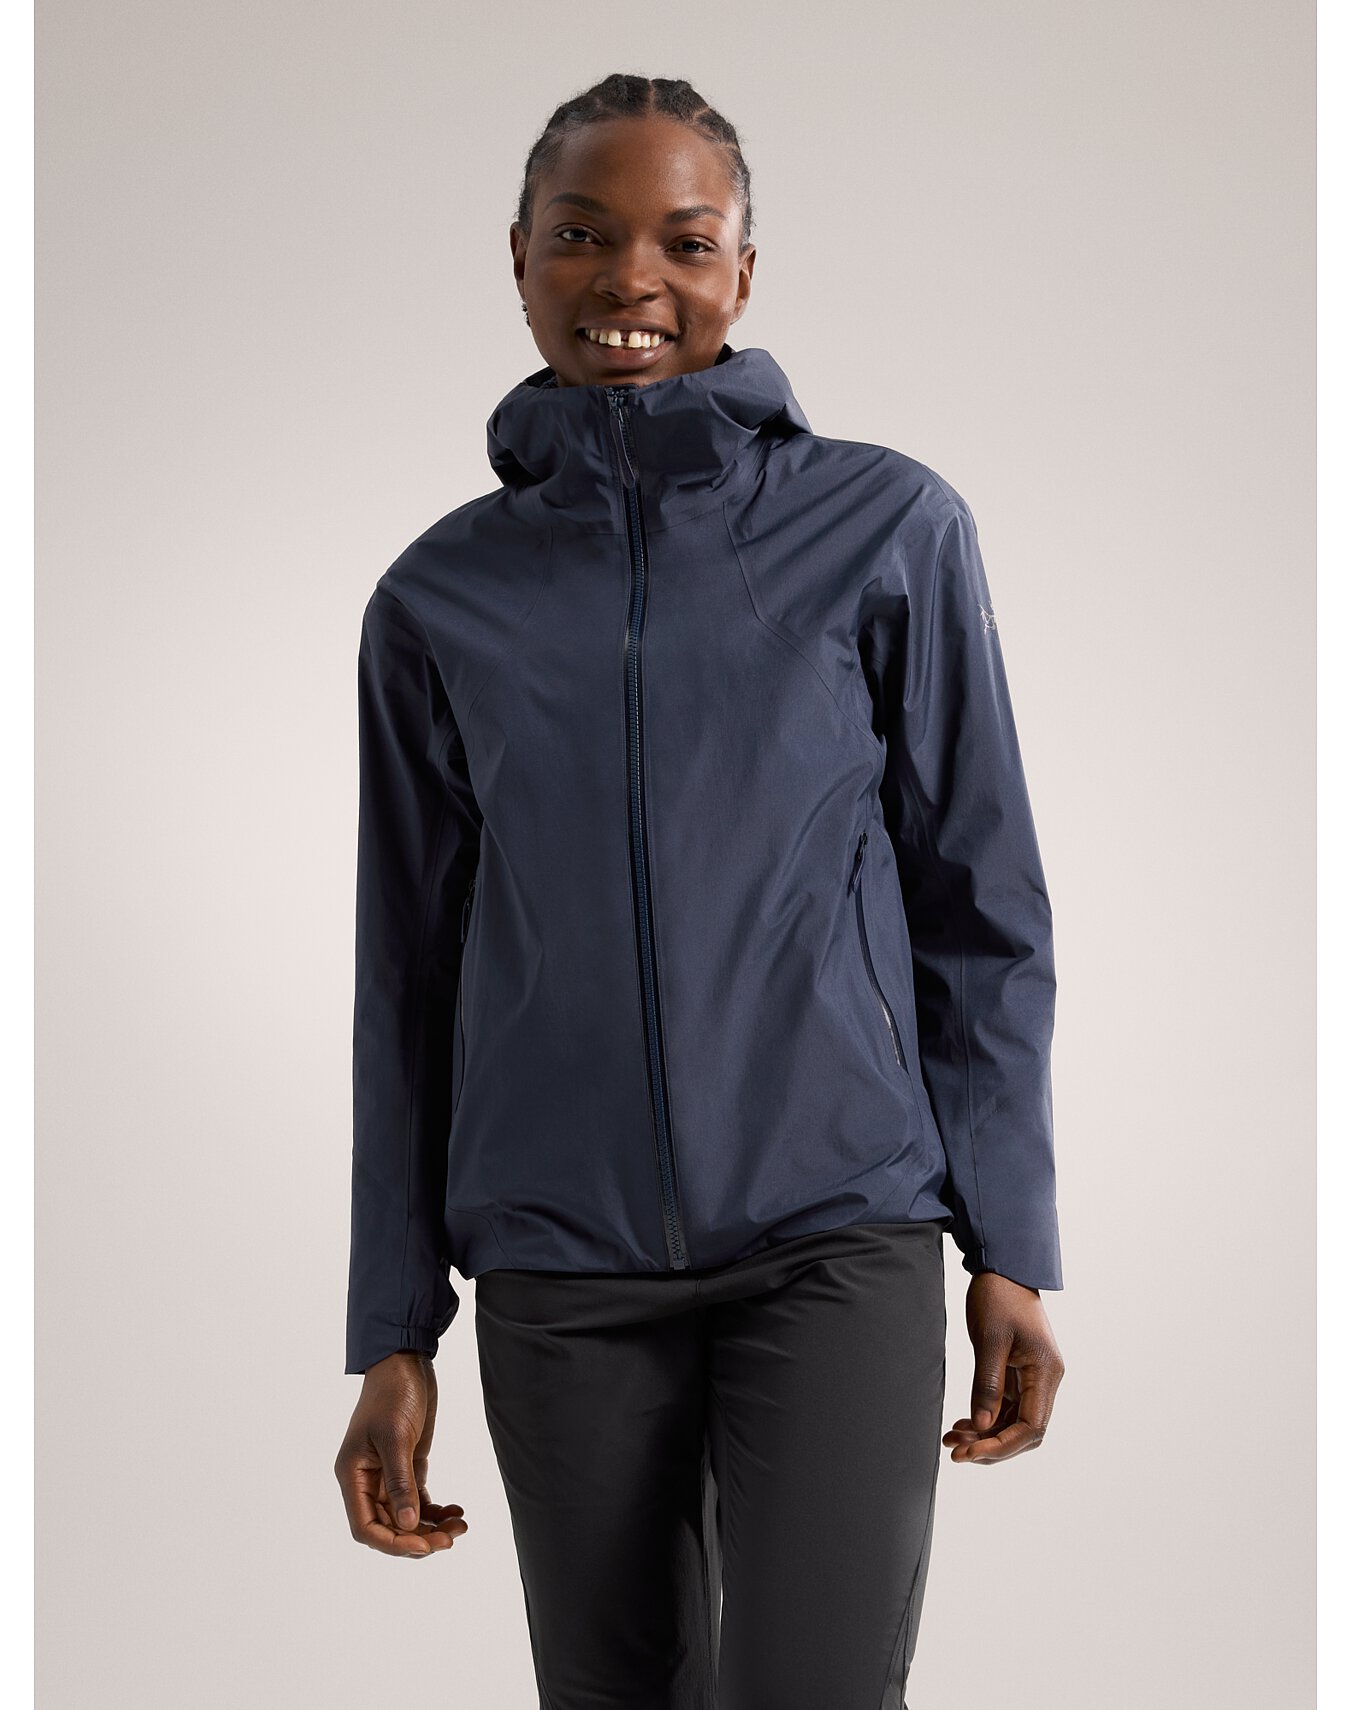 Women's UA Storm ColdGear® Infrared Down 3-in-1 Jacket | Under Armour